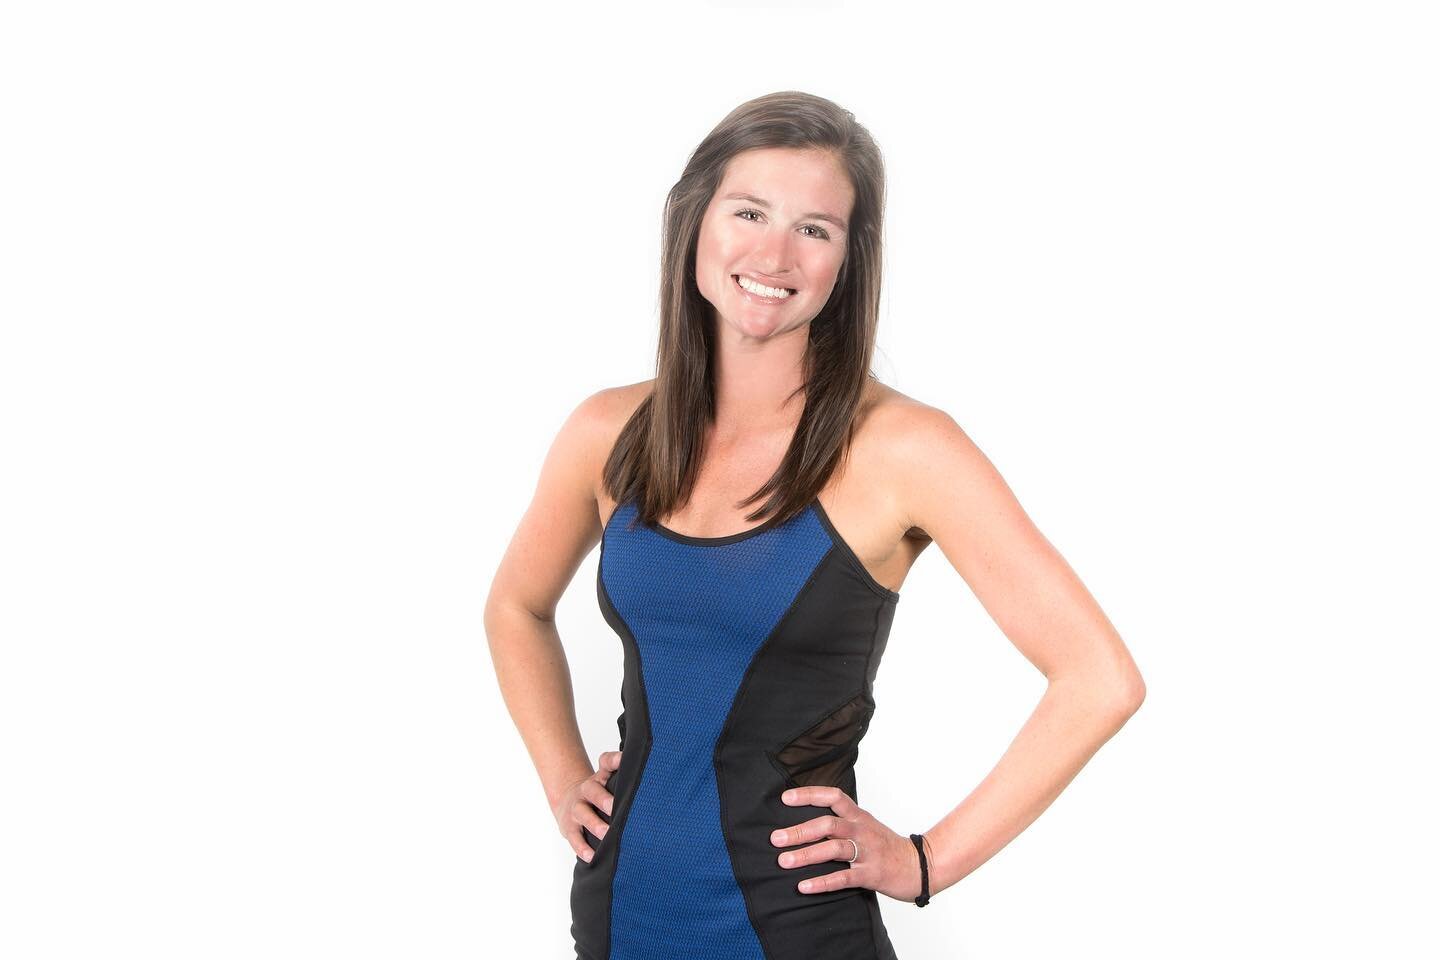 ✨Meet our teacher, Cara✨

Cara is an avid fitness enthusiast who has always found solace and balance through physical activity. Her passion for fitness was ignited during her high school years and has remained a constant in her life ever since. After